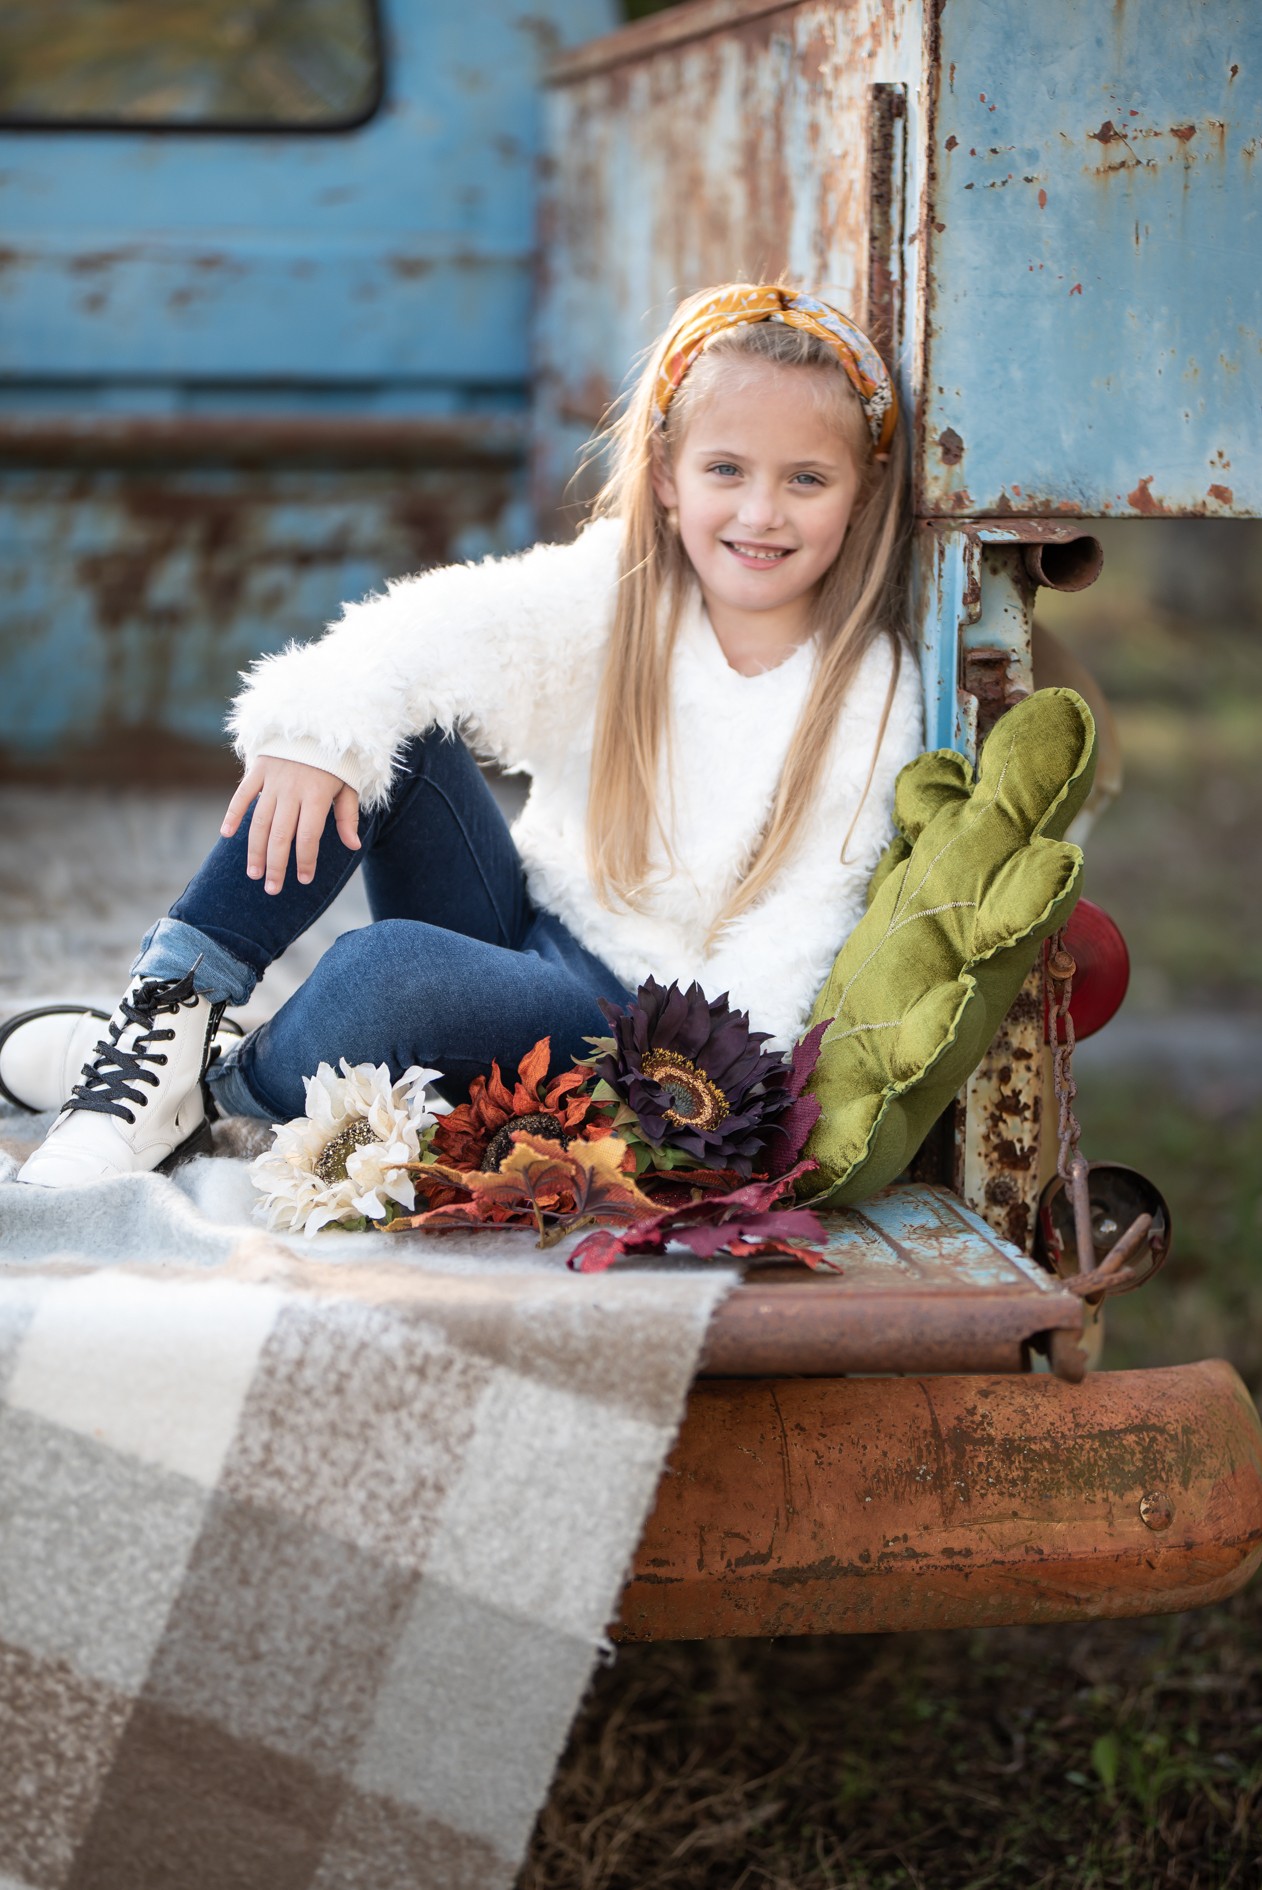 Raynah's 6 Year Photo Shoot with CeMe Photography featured on Nashville Baby Guide